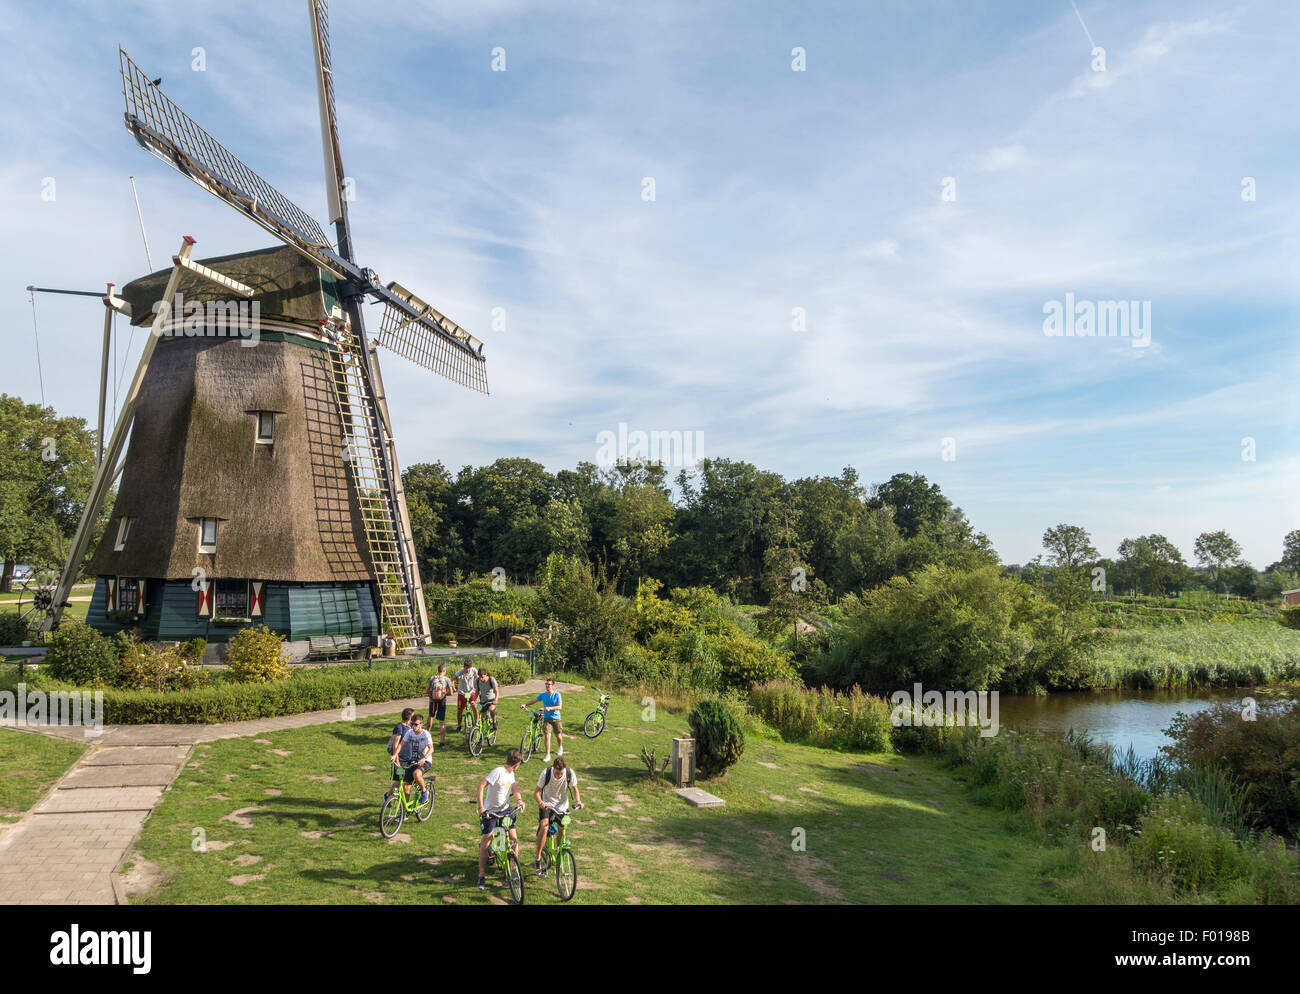 Verminderen Voorspellen Treinstation Amsterdam, the Rieker Windmill, de Riekermolen, on the Amstel River where  Rembrandt used to sketch. Young tour group on bicycle Stock Photo - Alamy